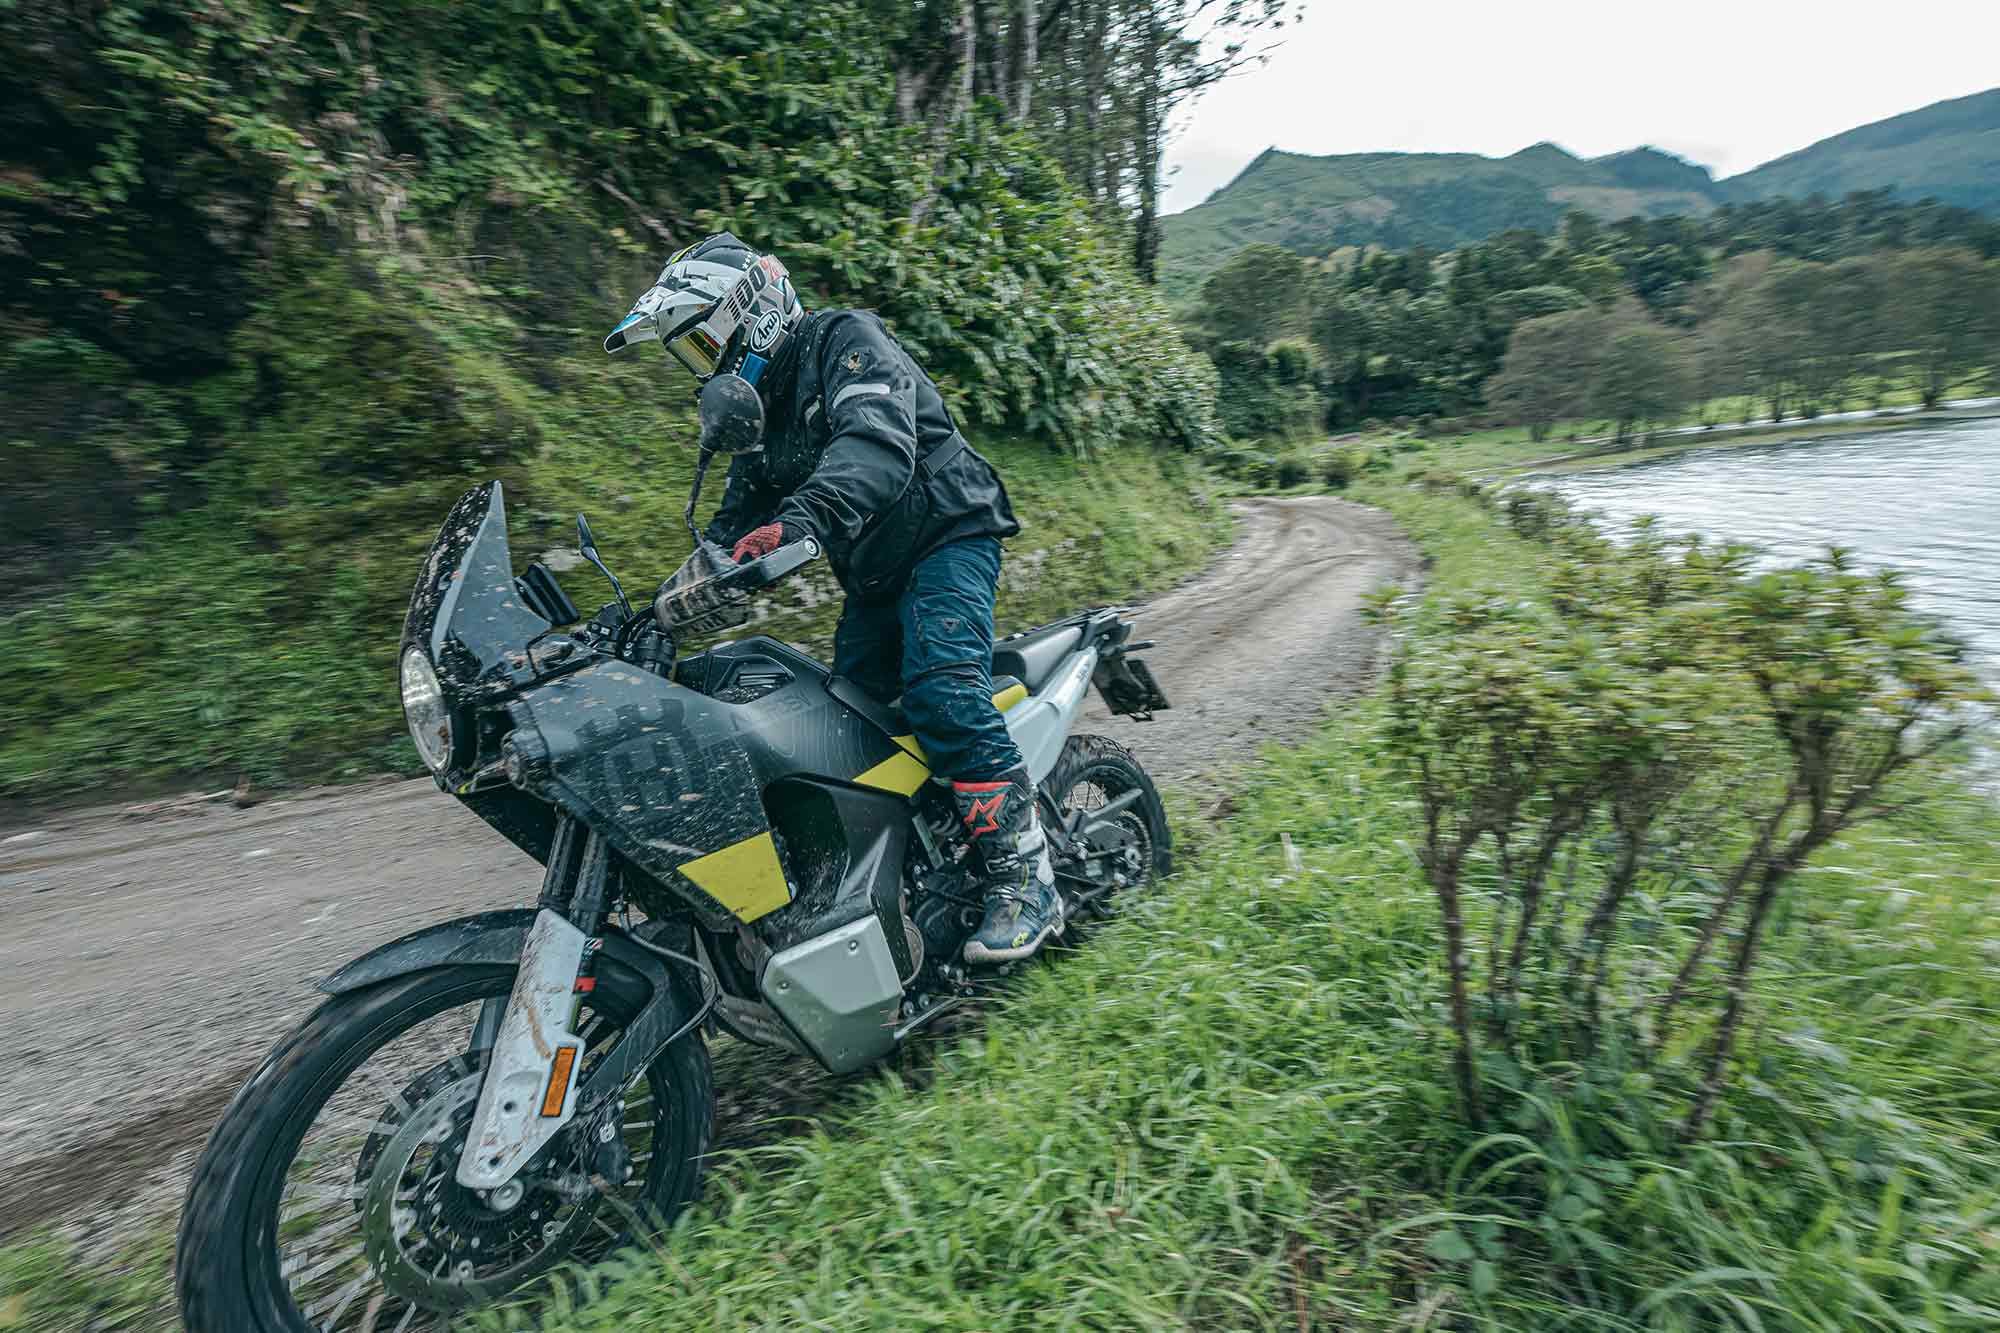 For most off-road travel the Norden 901 is suspended well, soaking up chop and rough roads with ease.